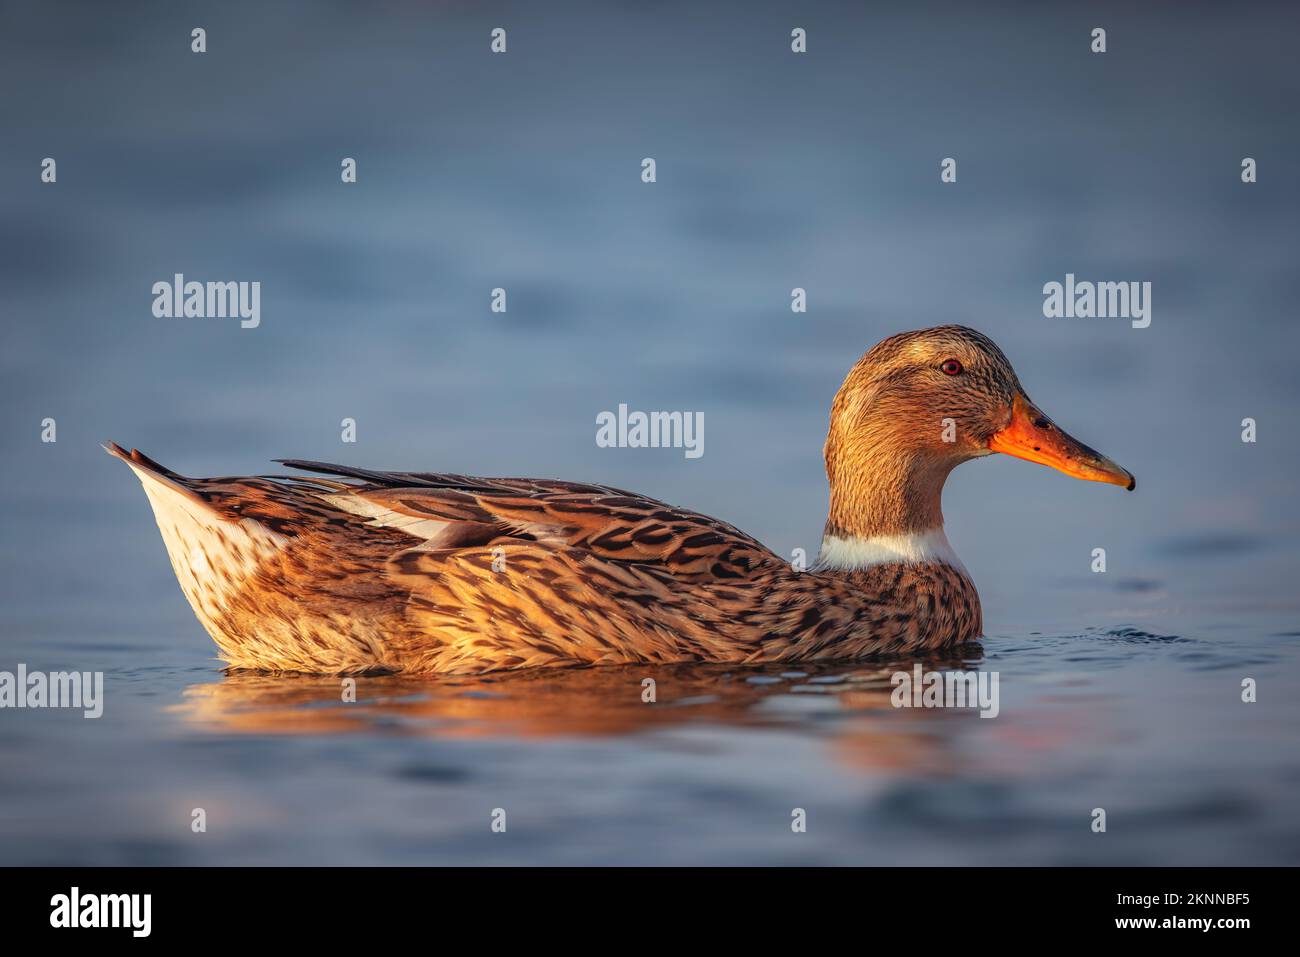 Wild duck bird floating in a water of a calm lake or sea in fog Stock Photo